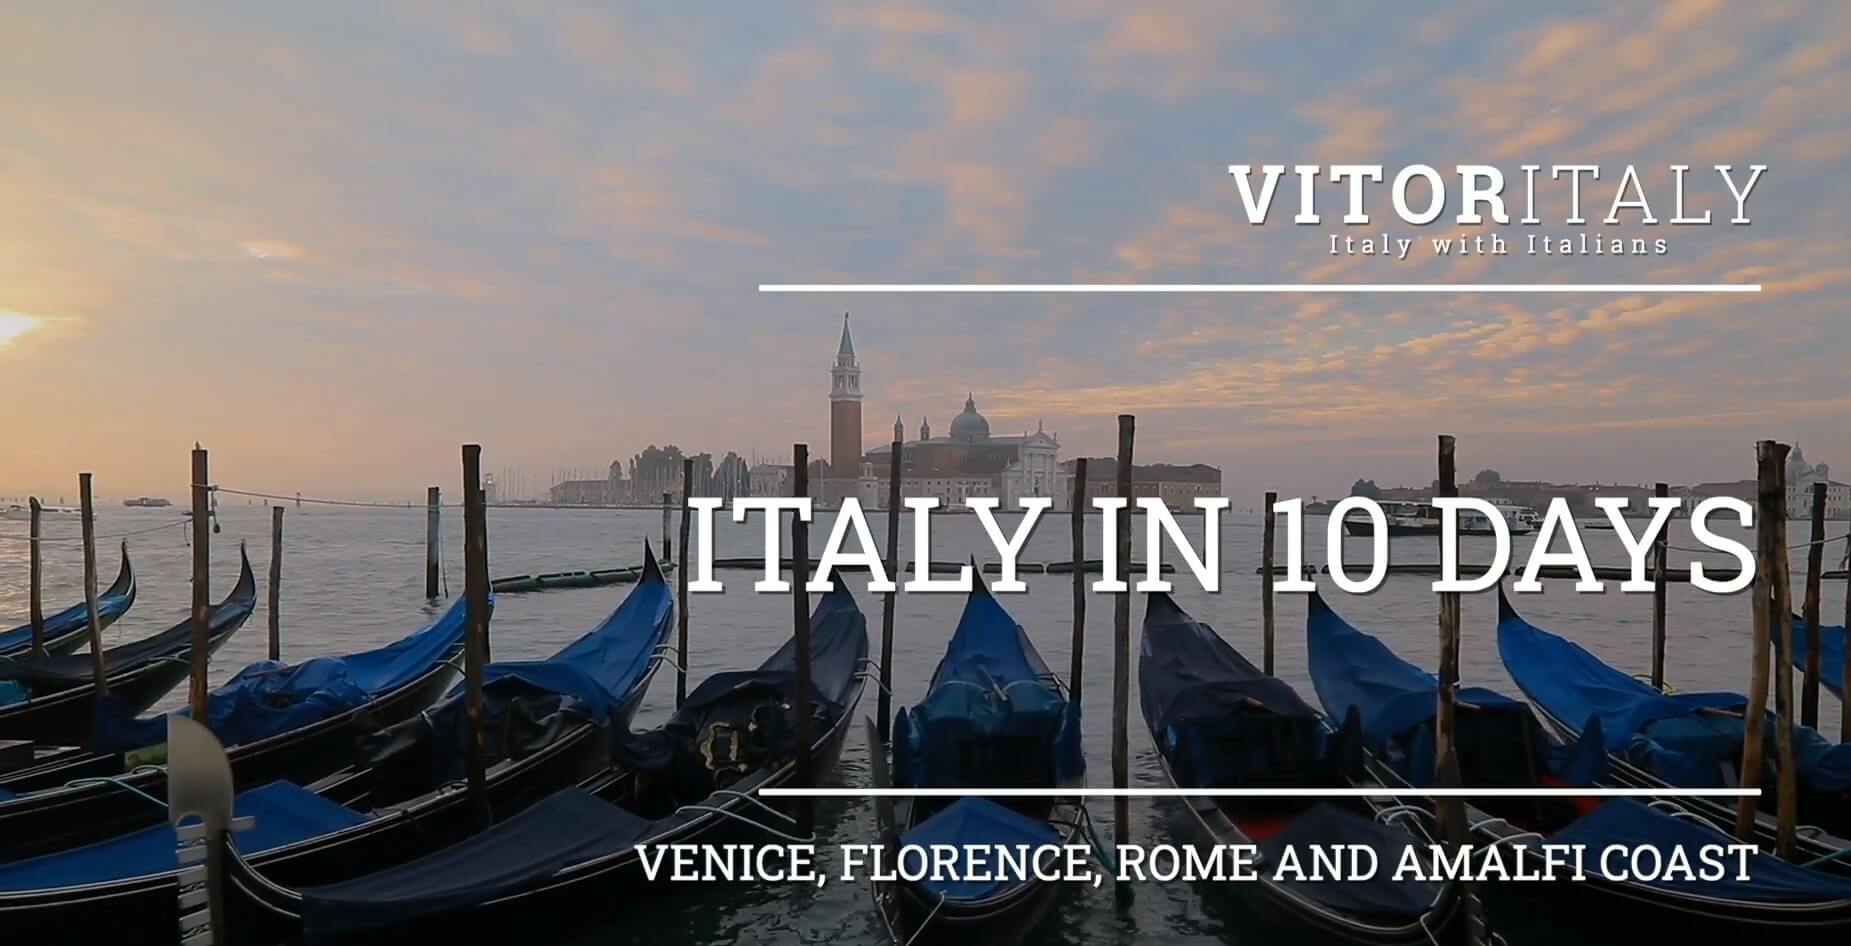 ITALY IN 10 DAYS PRIVATE TOUR - Venice, Florence, Rome and Amalfi Coast